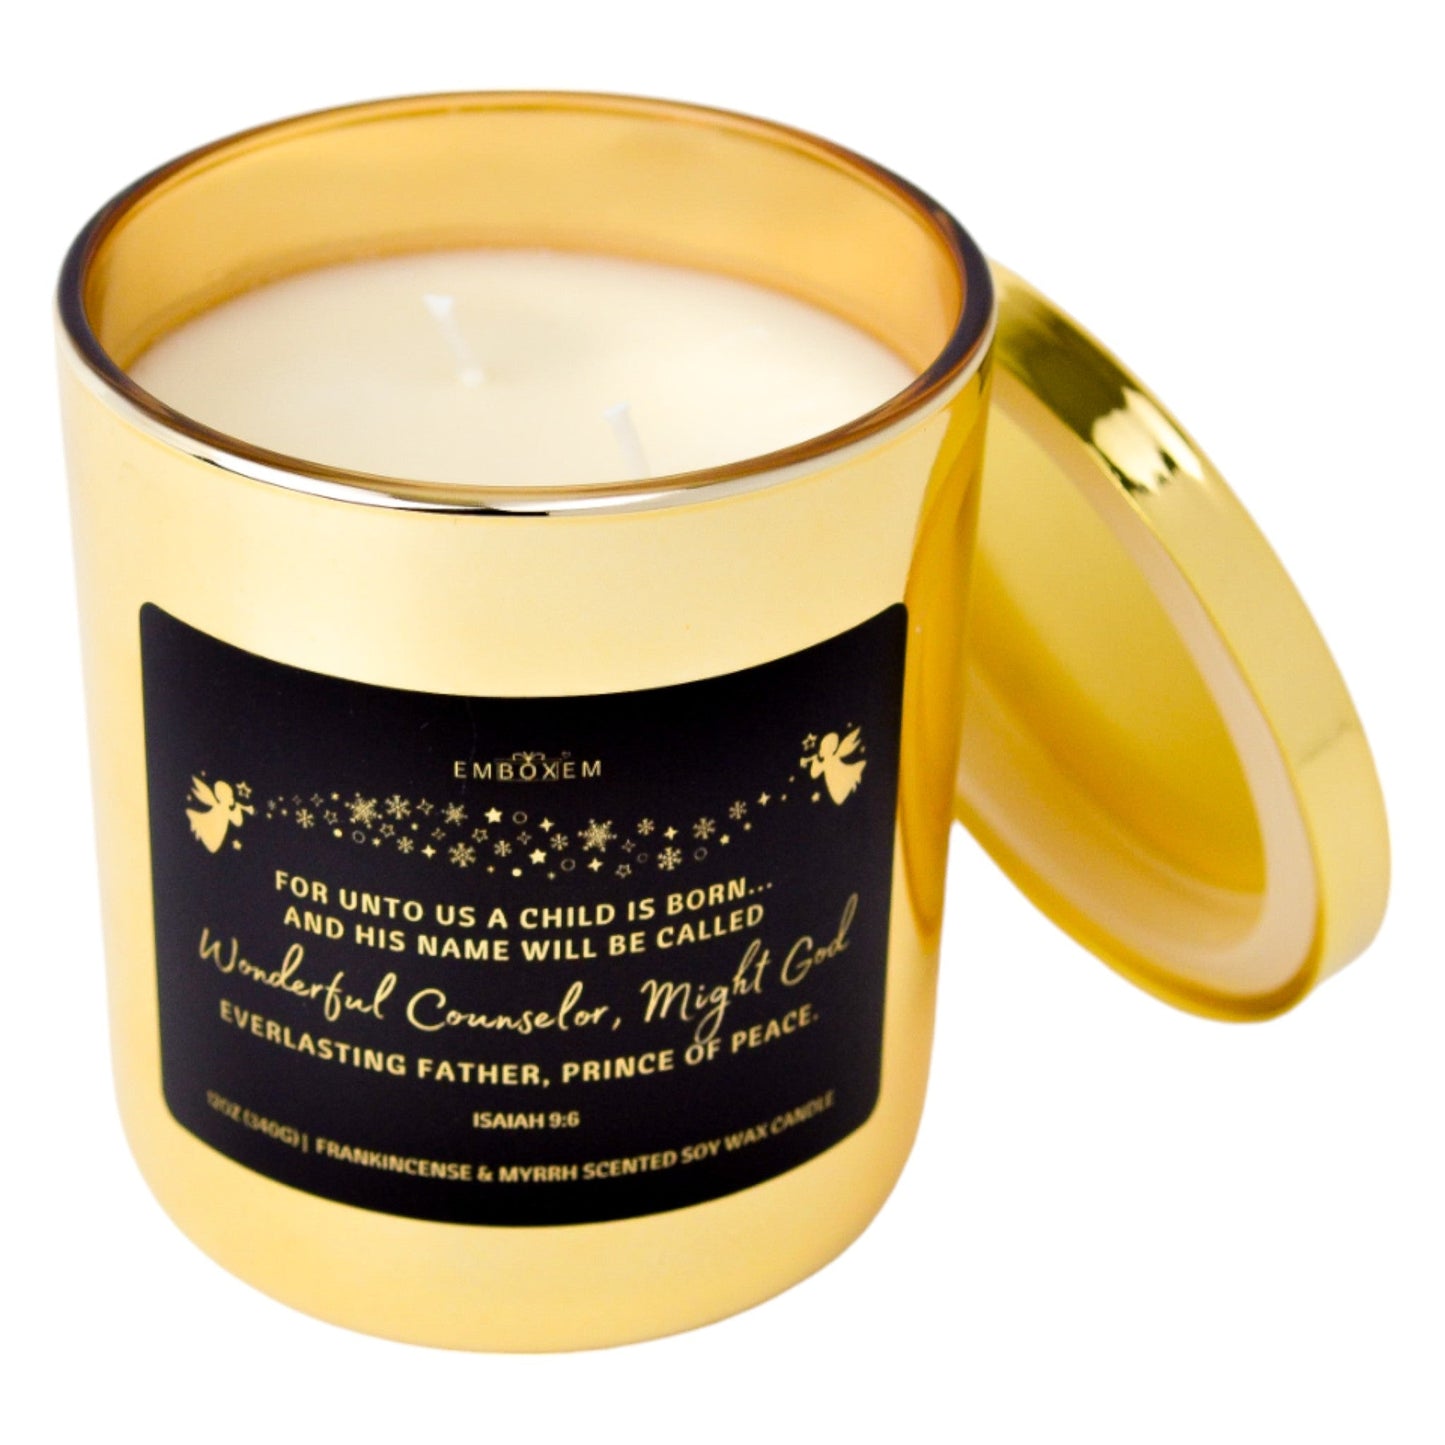 Frankincense and Myrrh Scented Soy Wax Candle For unto us a child is born